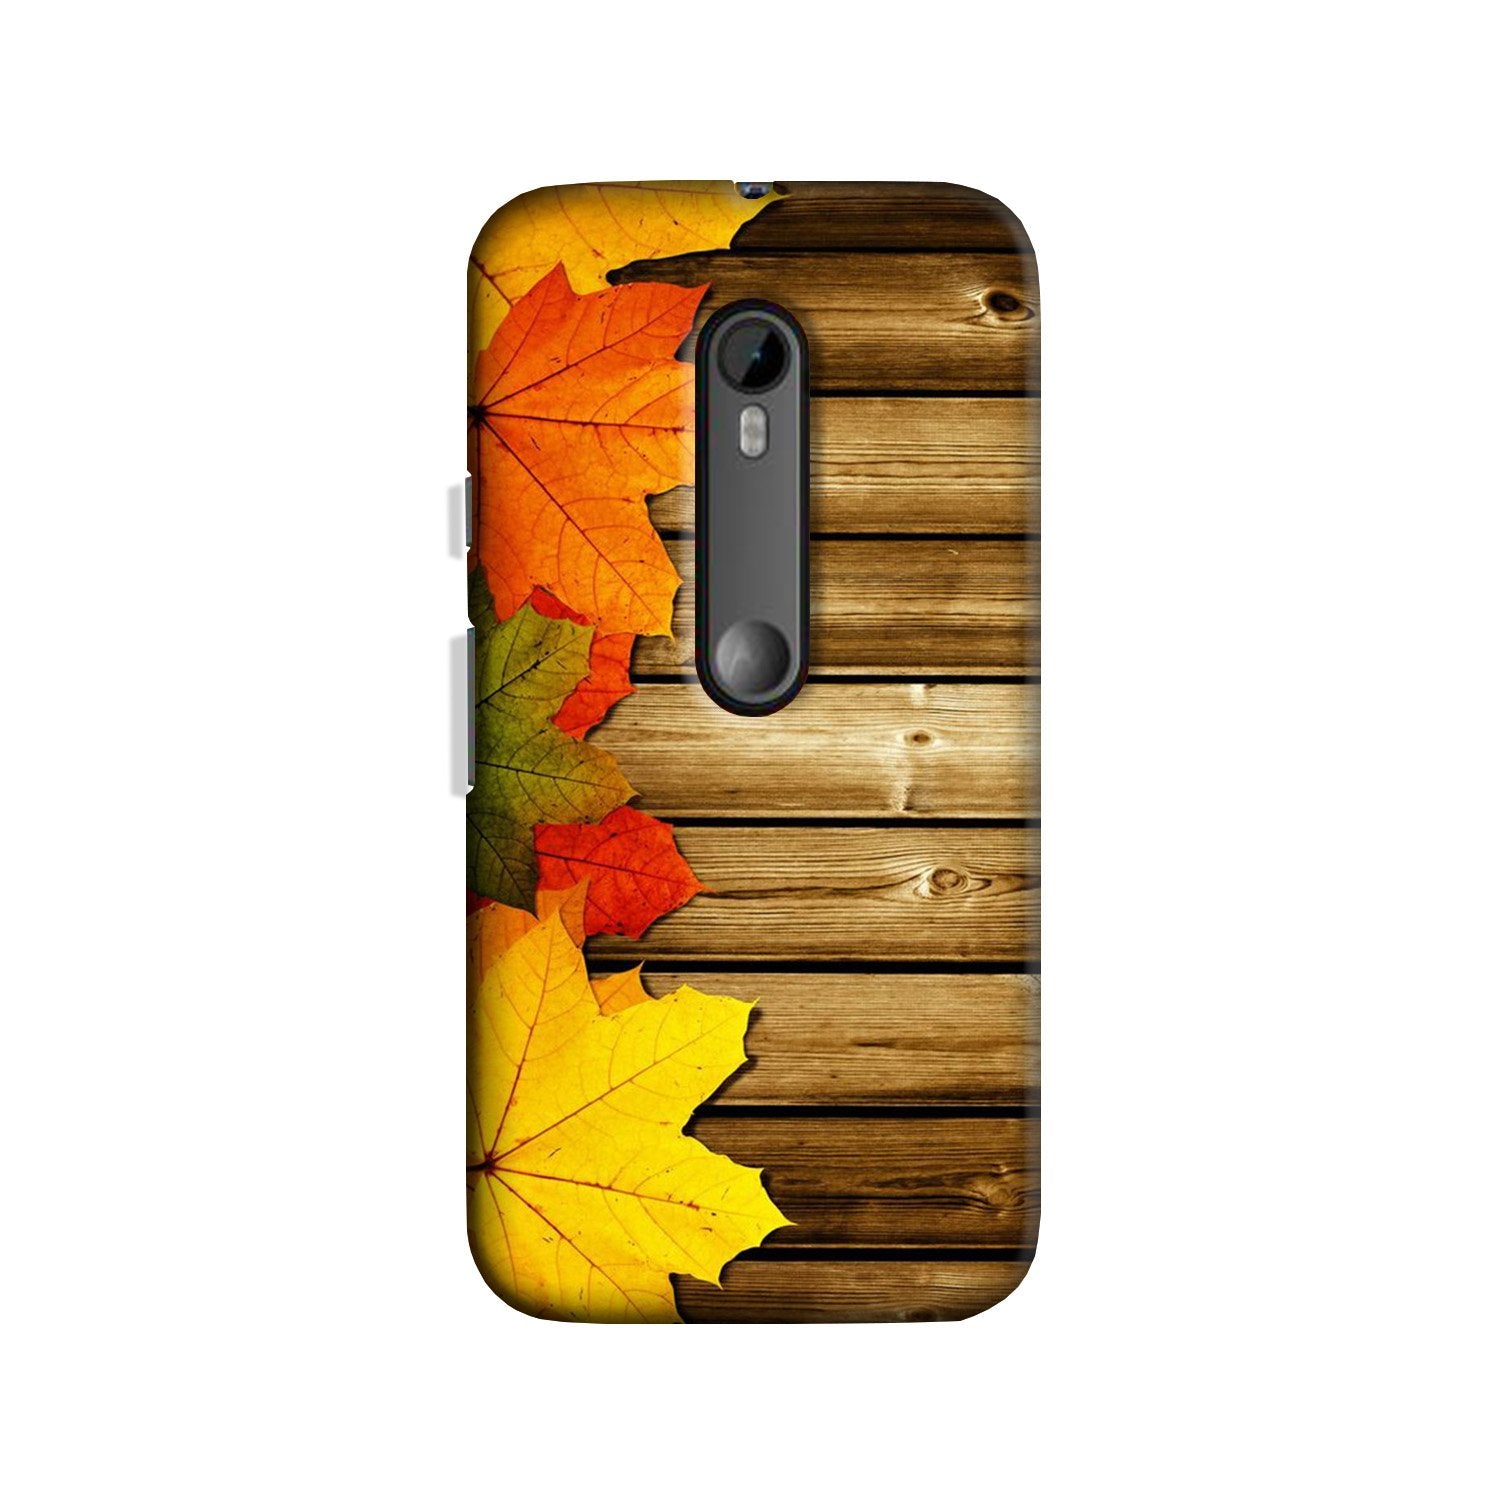 Wooden look3 Case for Moto X Style